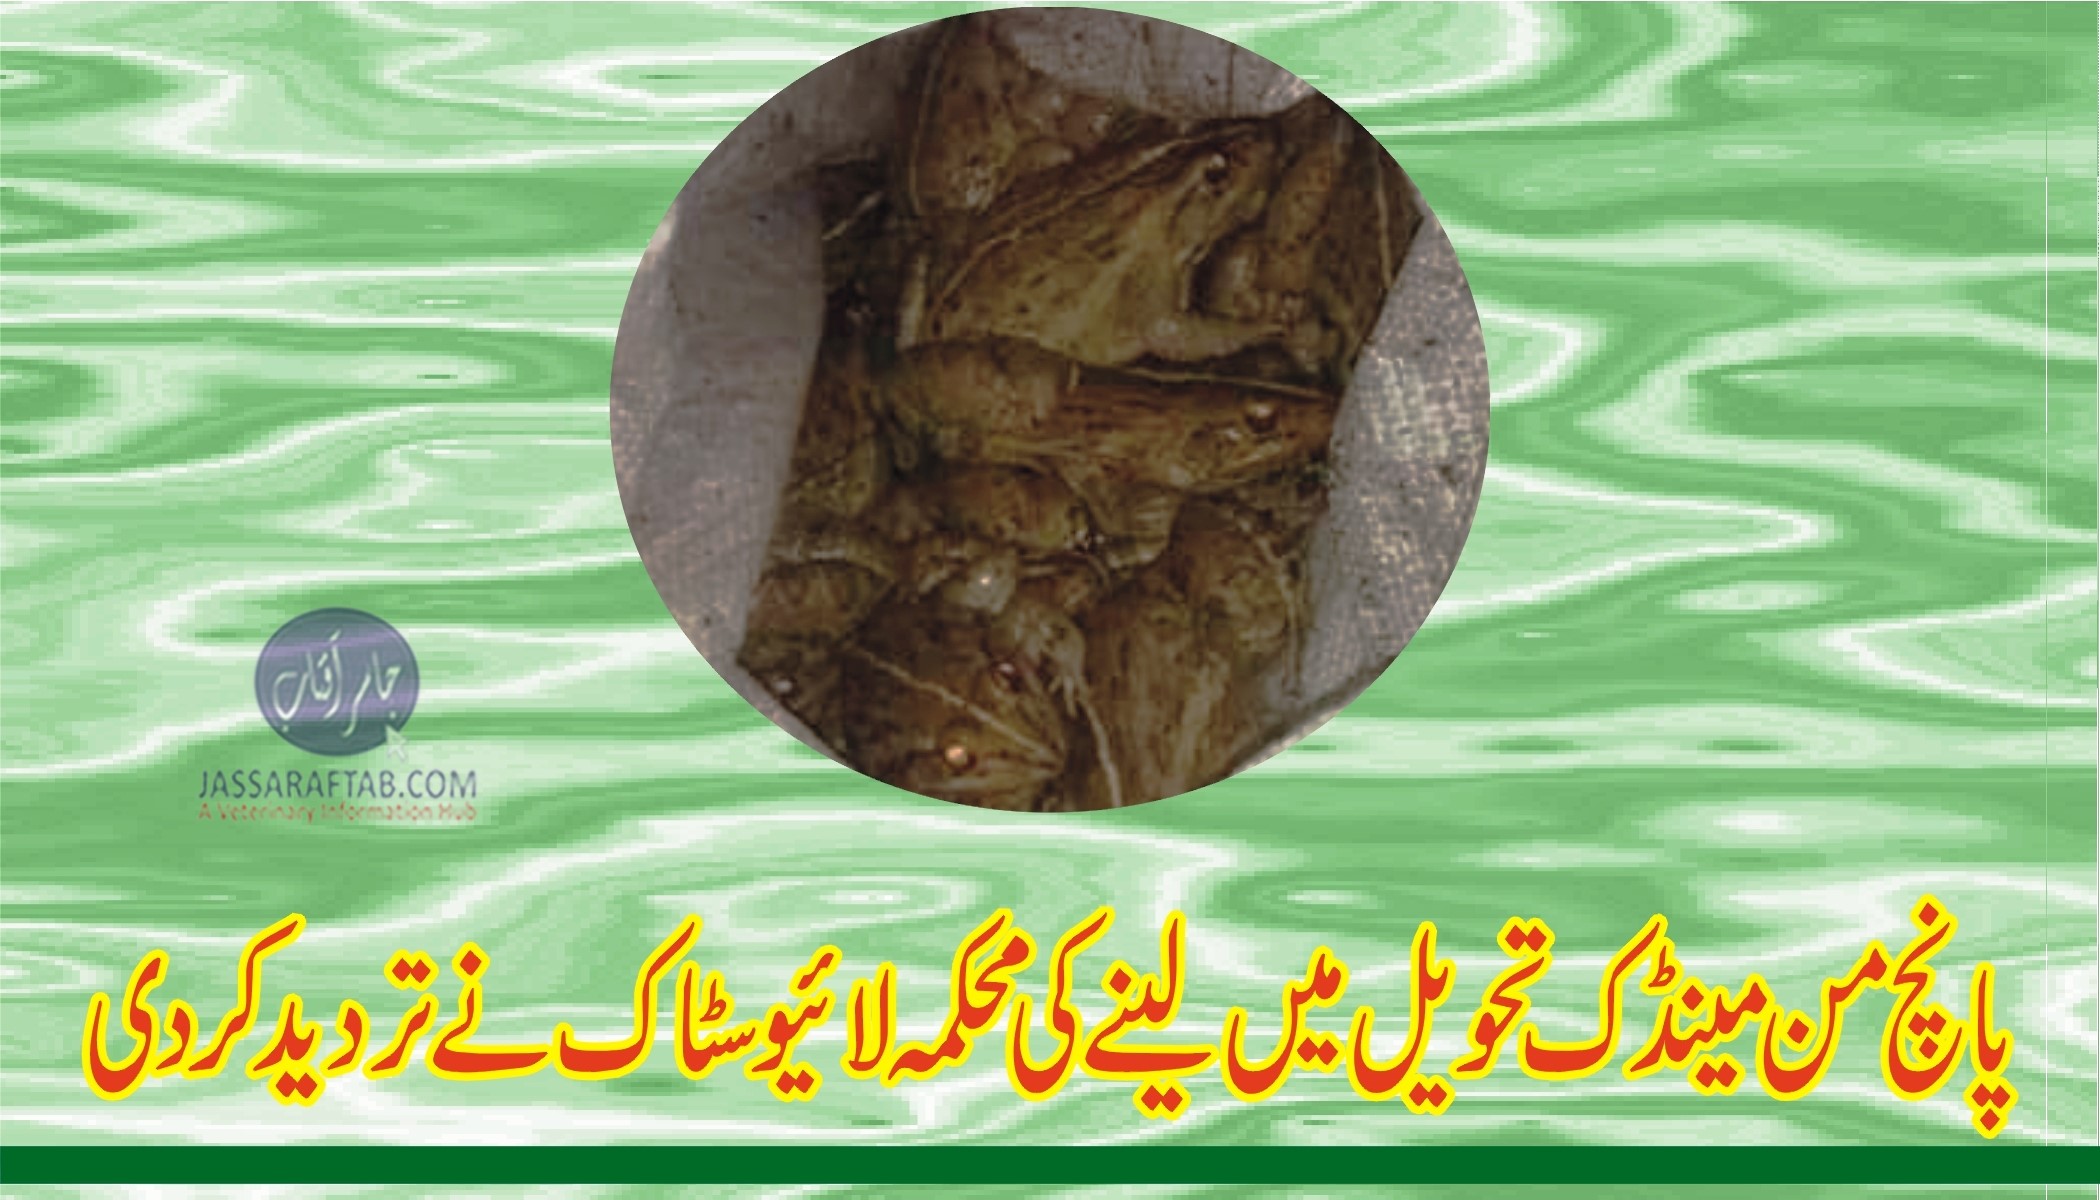 Frog meat in Lahore